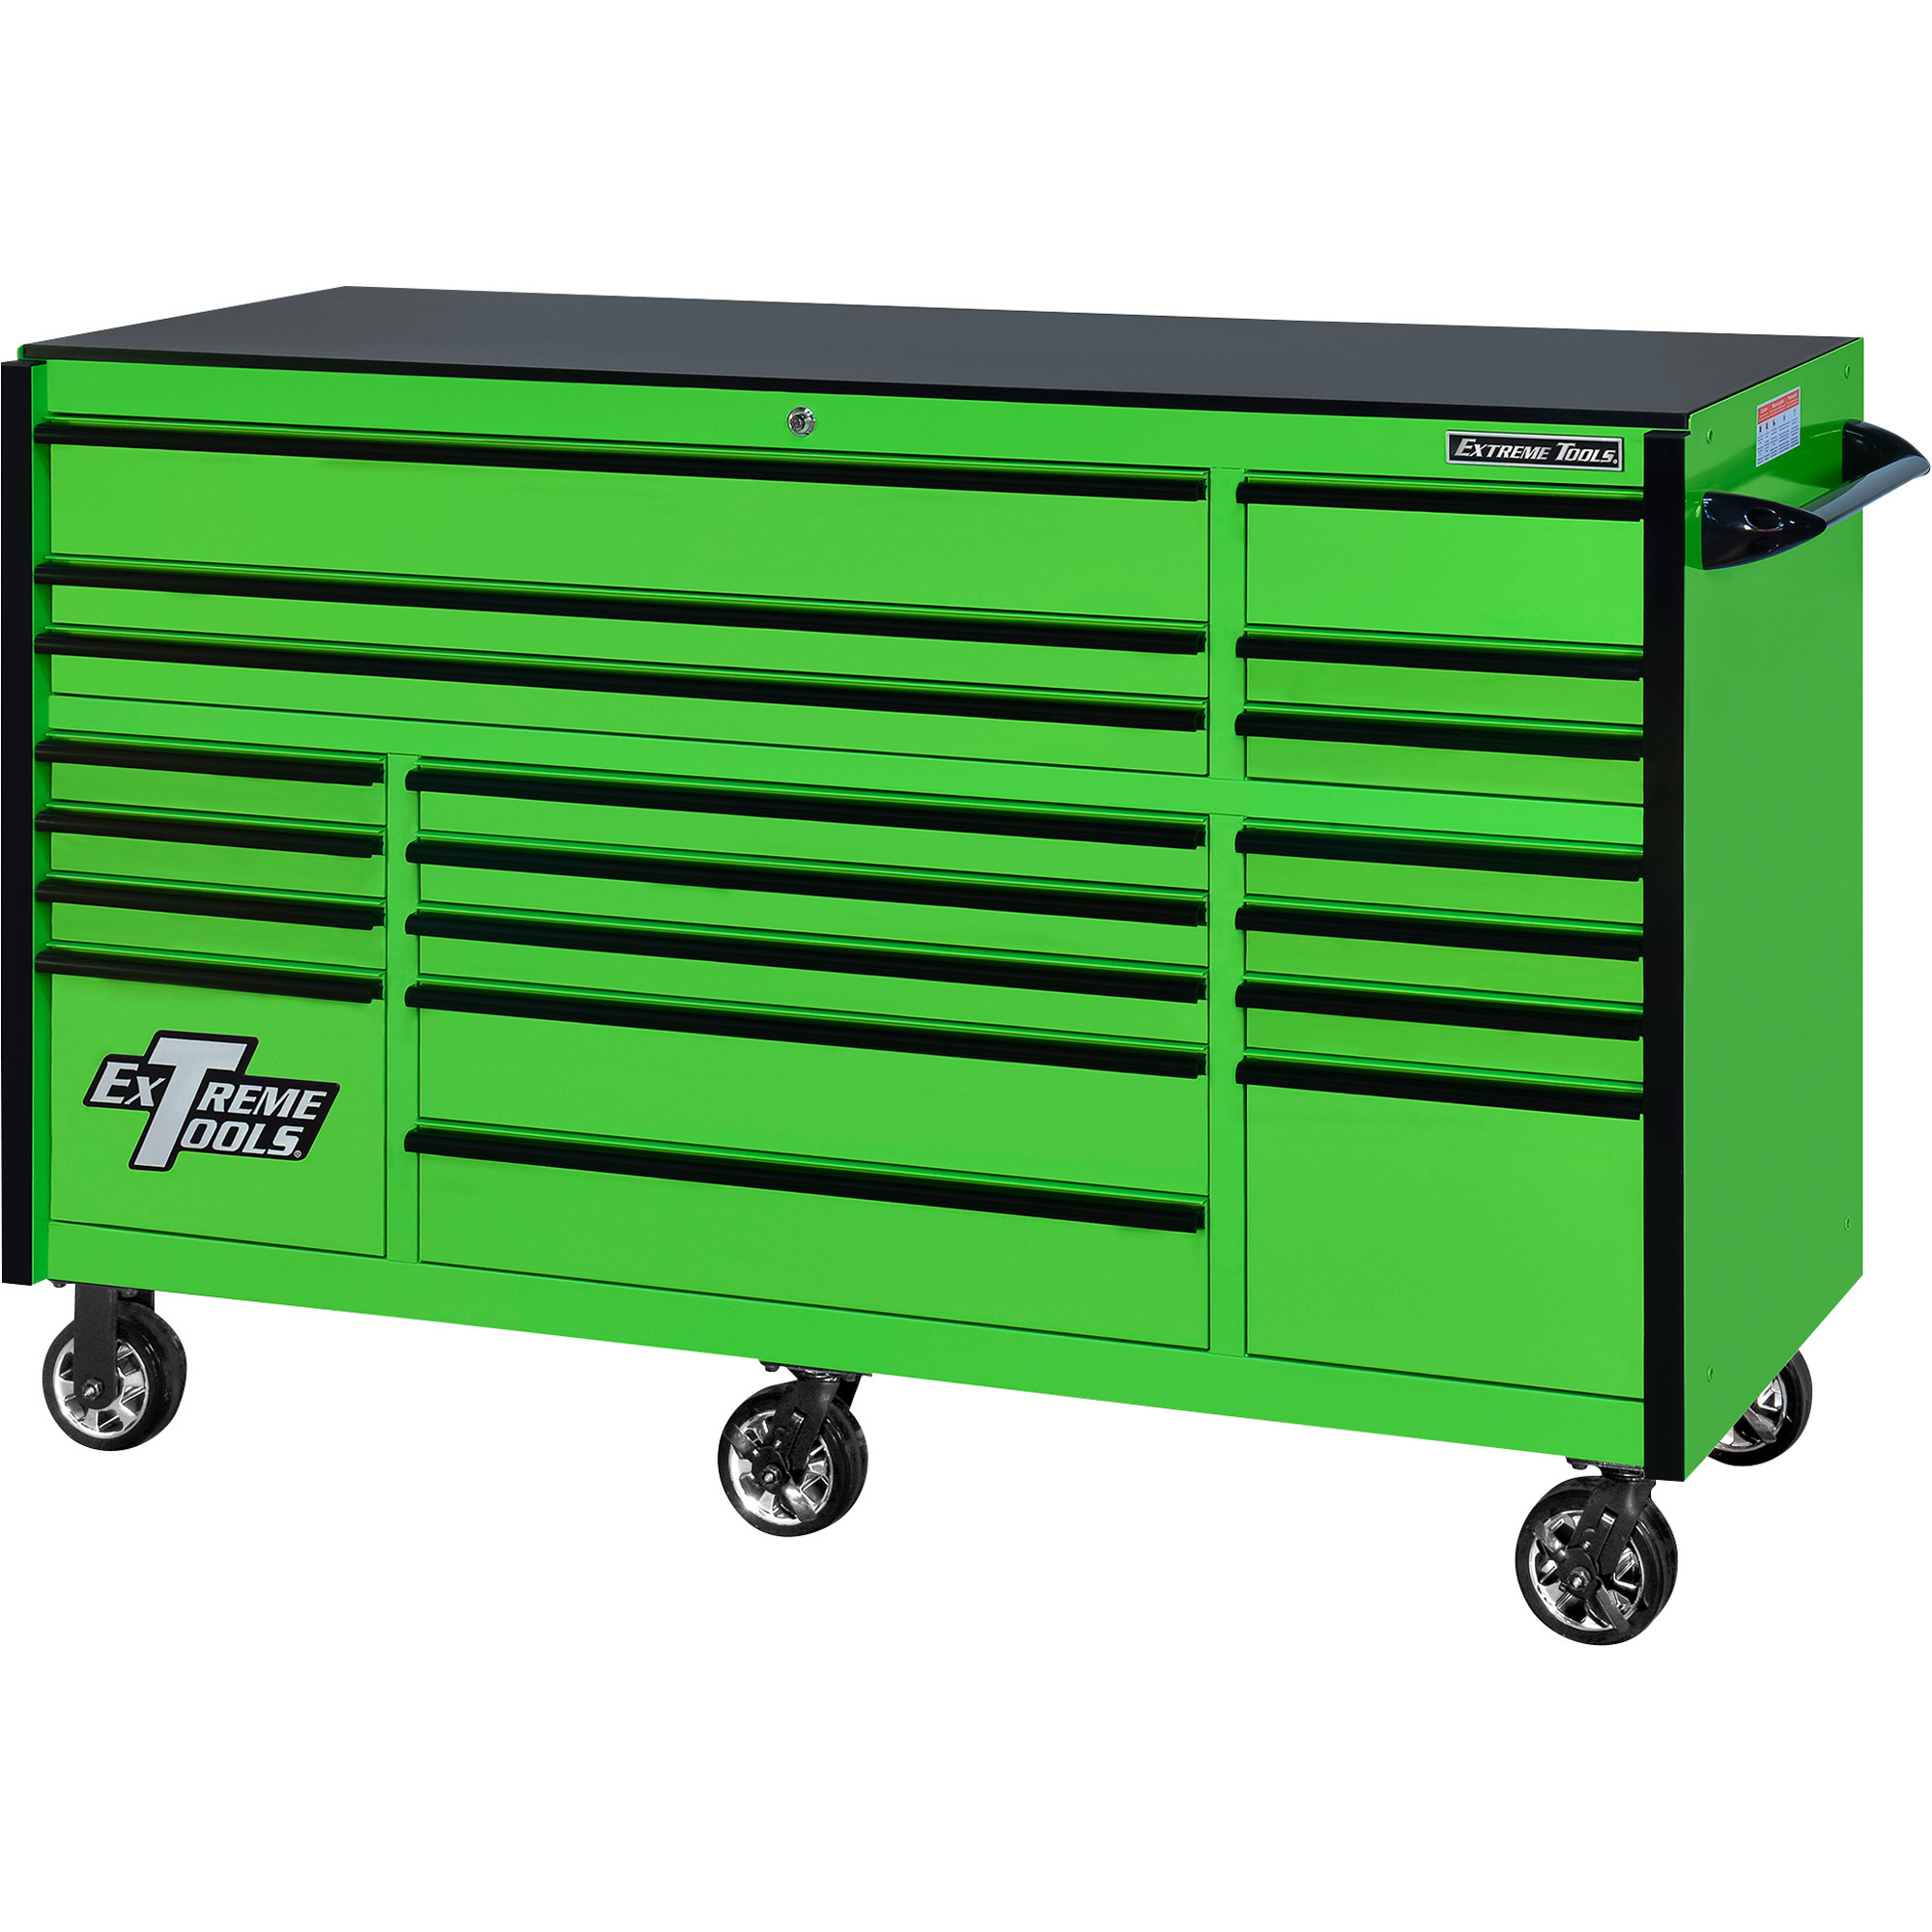 Extreme Tools RX Series 72Inch L x 30Inch W 19 Drawer Tool Roller Cabinet â Green with Black Drawer Pulls, 72Inch W x 30Inch D x 47Inch H, Model